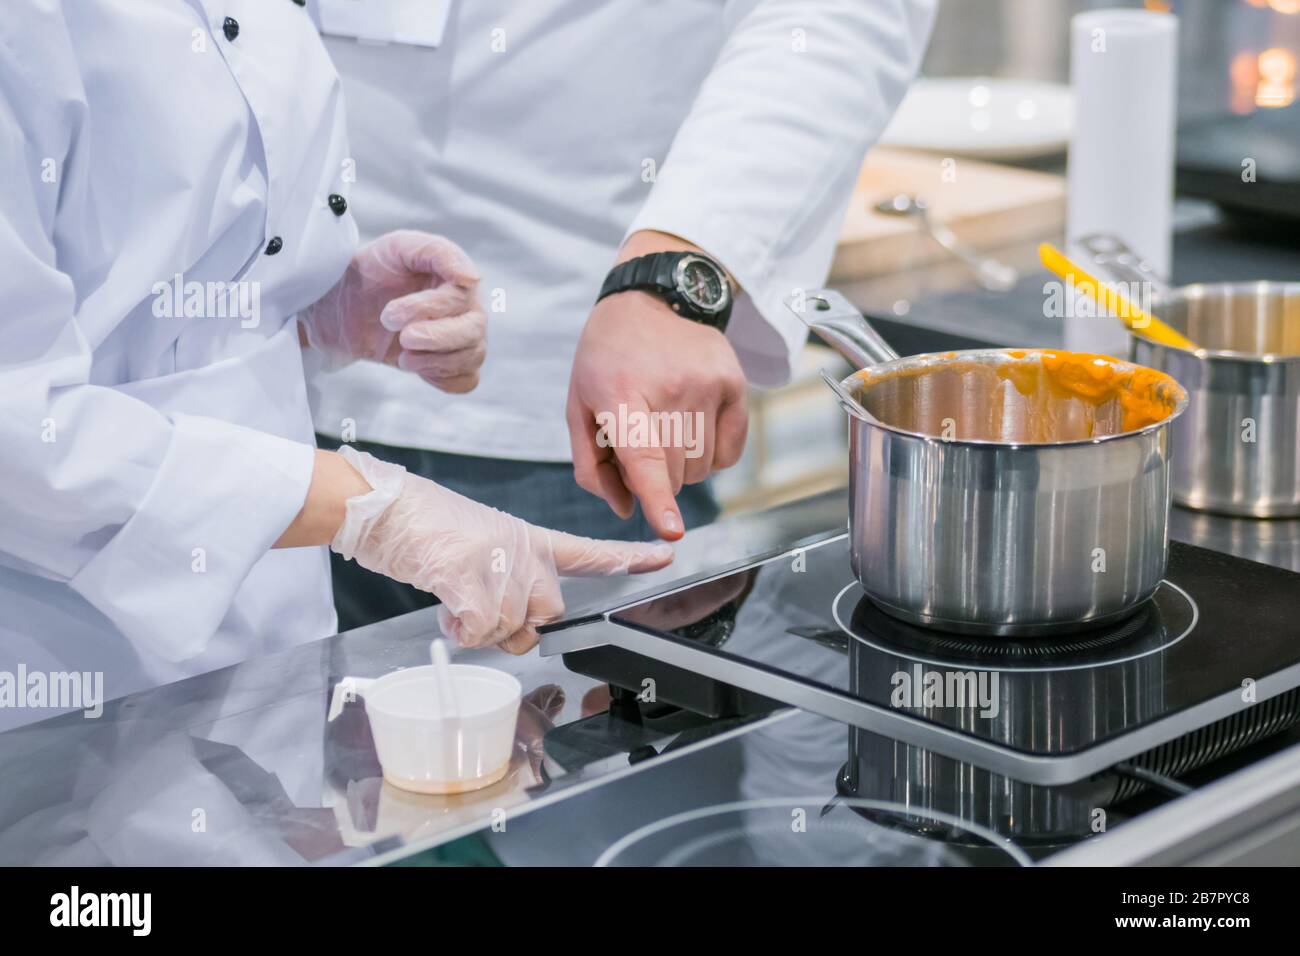 Chef shows how to use electric stove at cuisine of restaurant Stock Photo